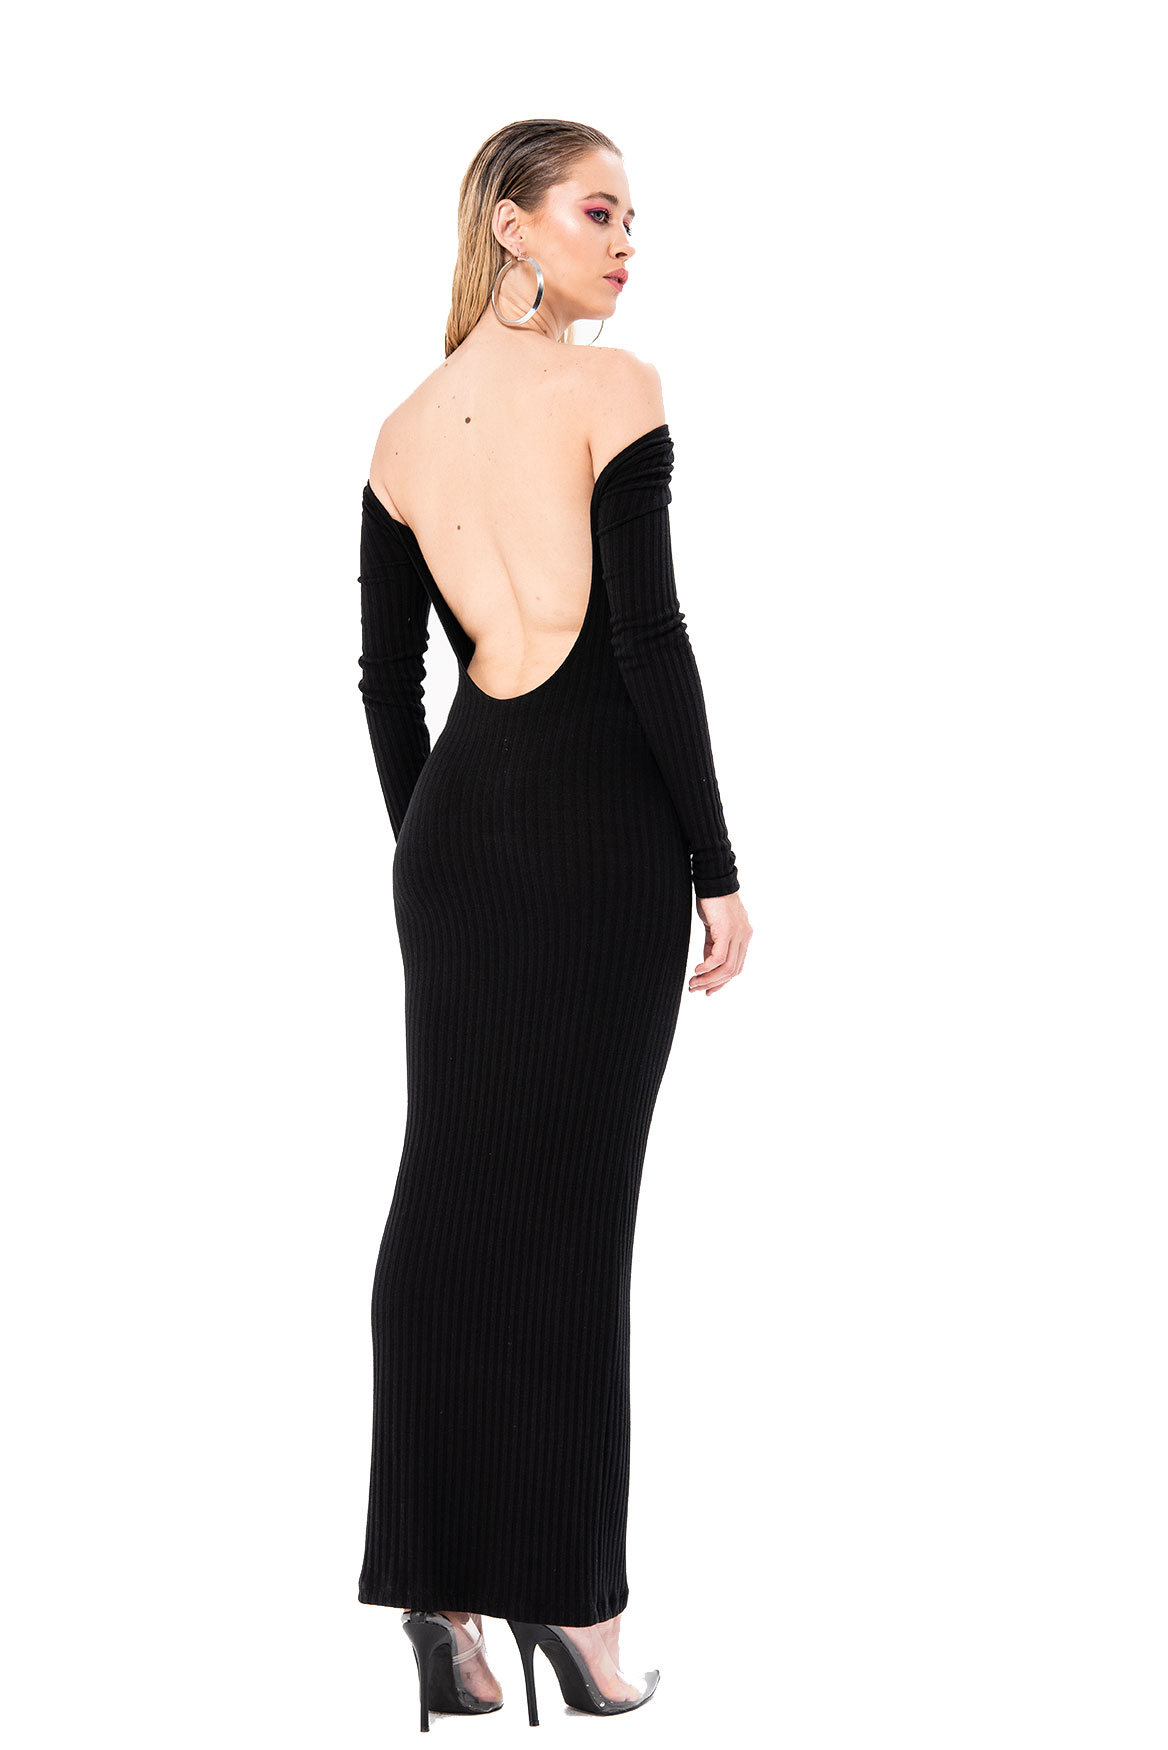 Vision of Delight Black Backless Mermaid Maxi Dress | Gowns of elegance,  Shrug for dresses, Maxi dress